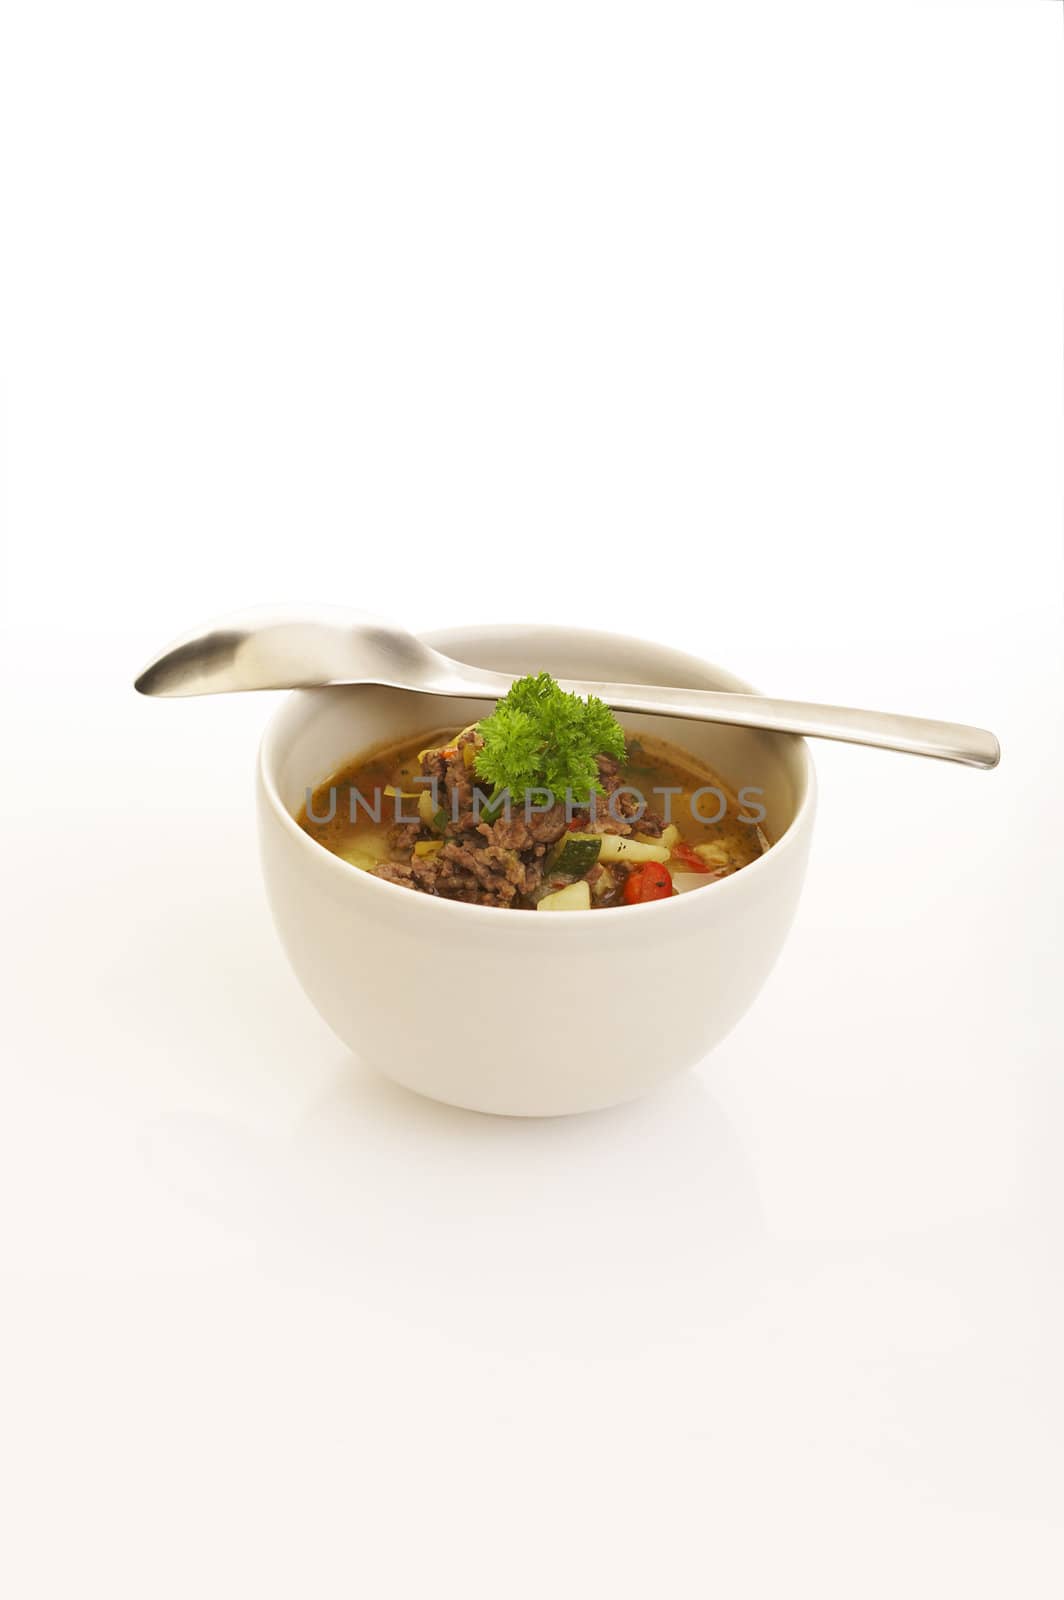 Vegetable and ground meat soup over a white background